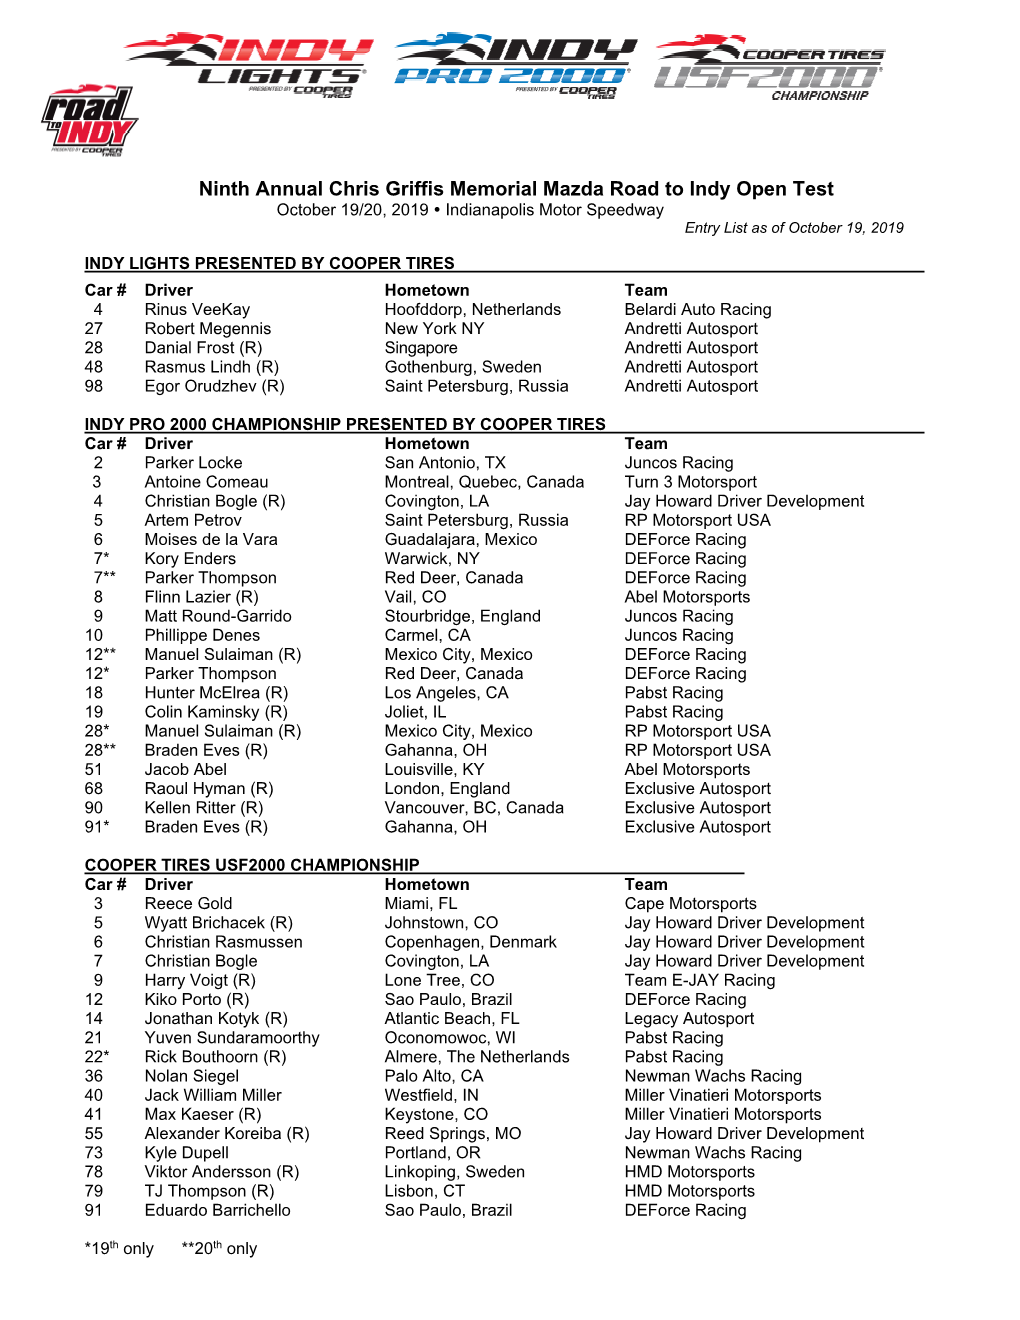 Ninth Annual Chris Griffis Memorial Mazda Road to Indy Open Test October 19/20 , 201 9  Indianapolis Motor Speedway Entry List As of October 1 9 , 2019